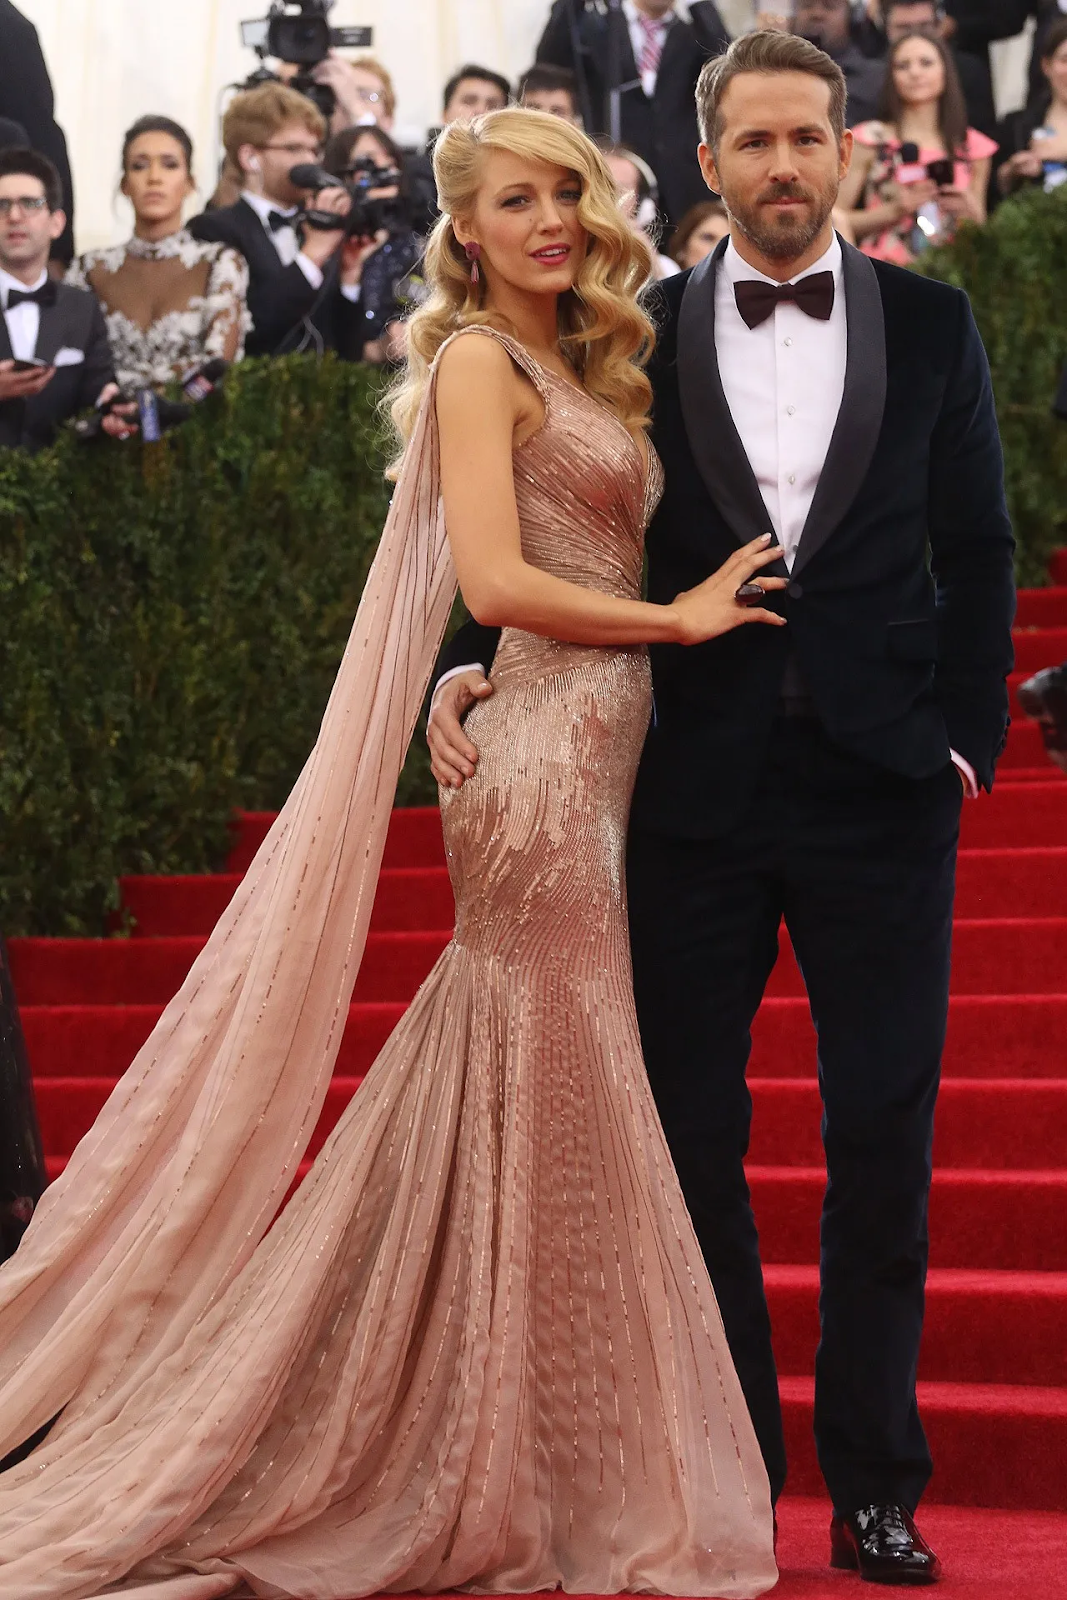 Blake Lively and Ryan Reynolds had a private wedding affair.